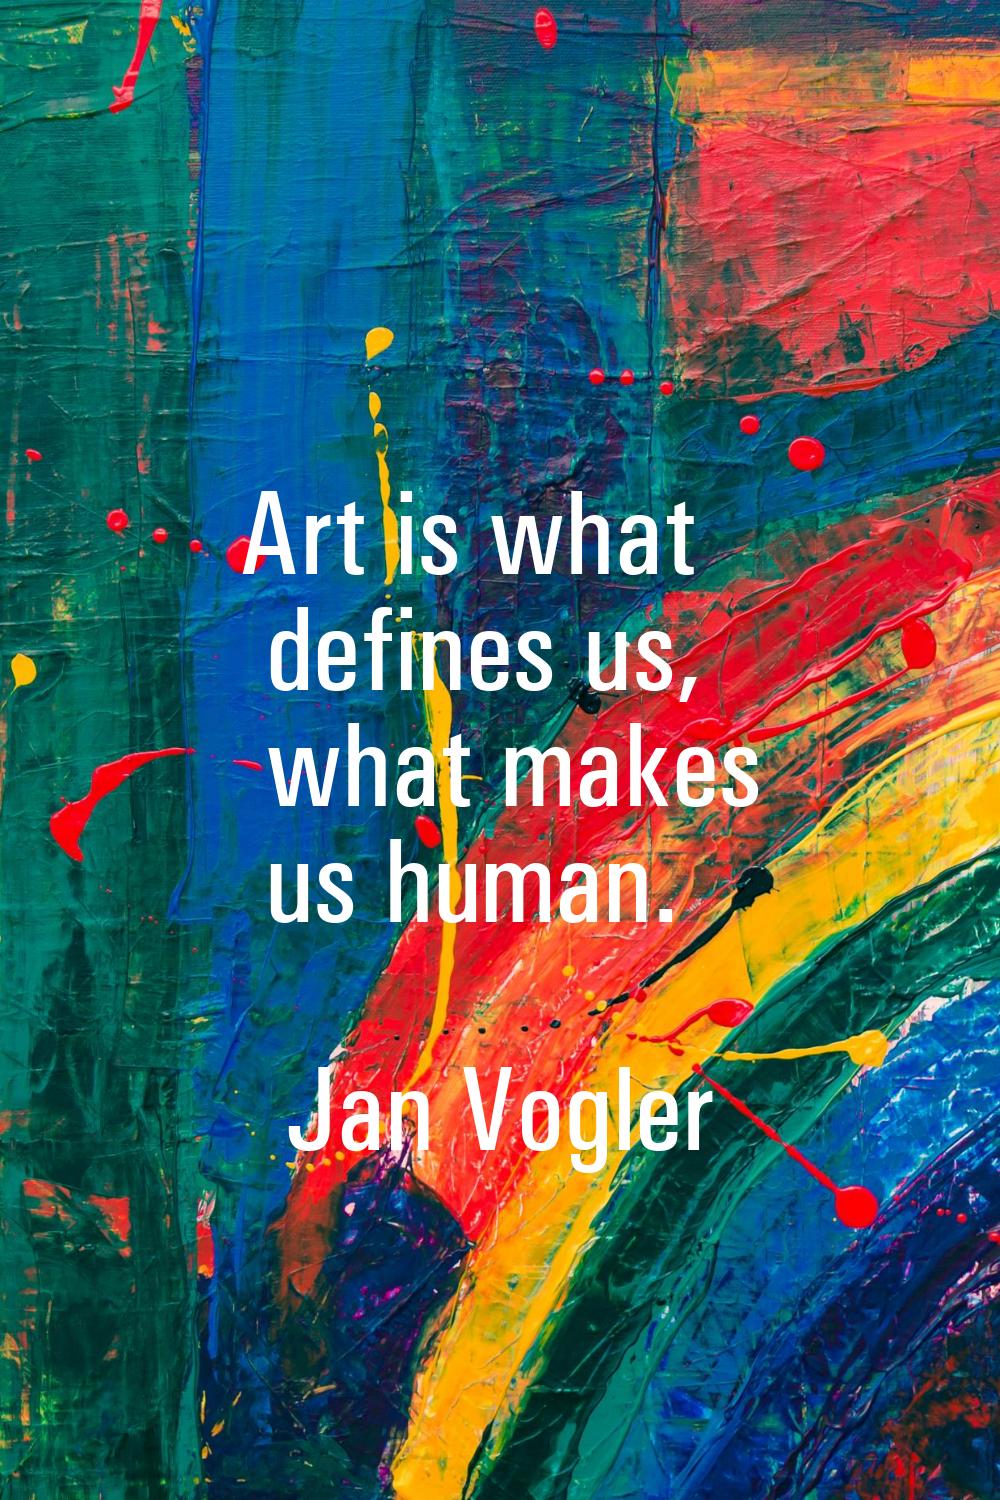 Art is what defines us, what makes us human.